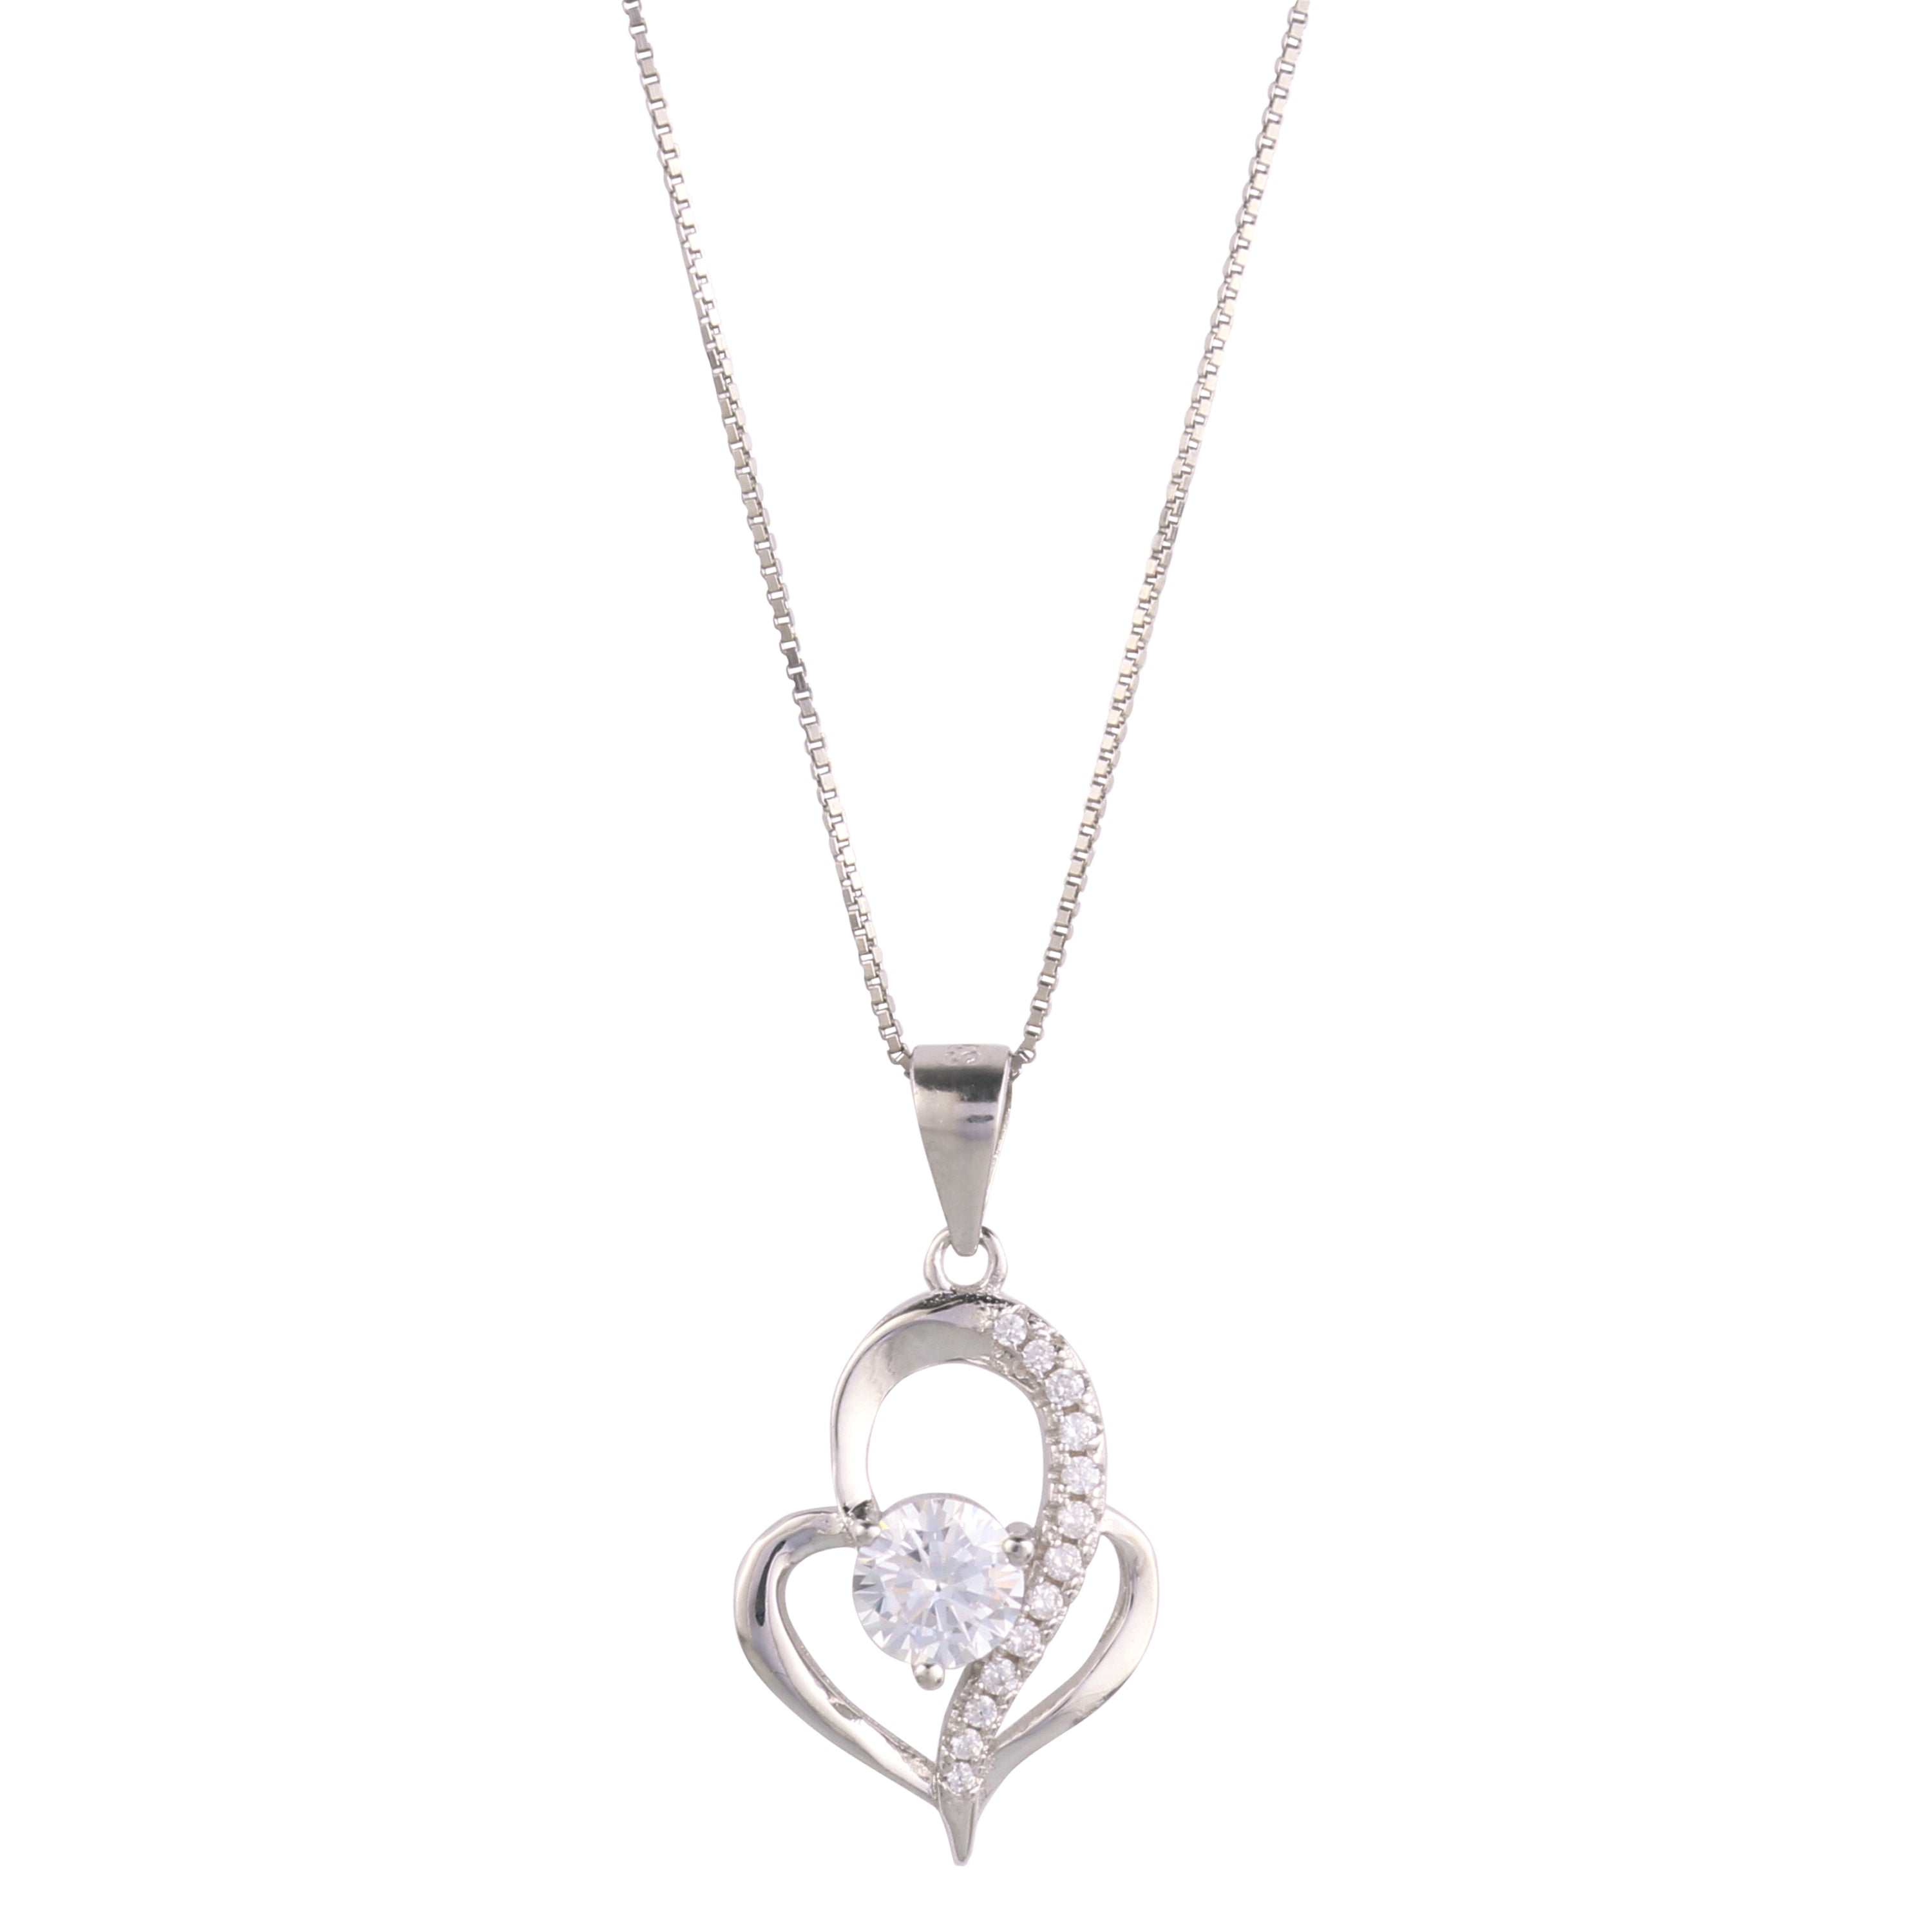 925 Sterling Silver Pave Heart Pendant Necklace Nichestar